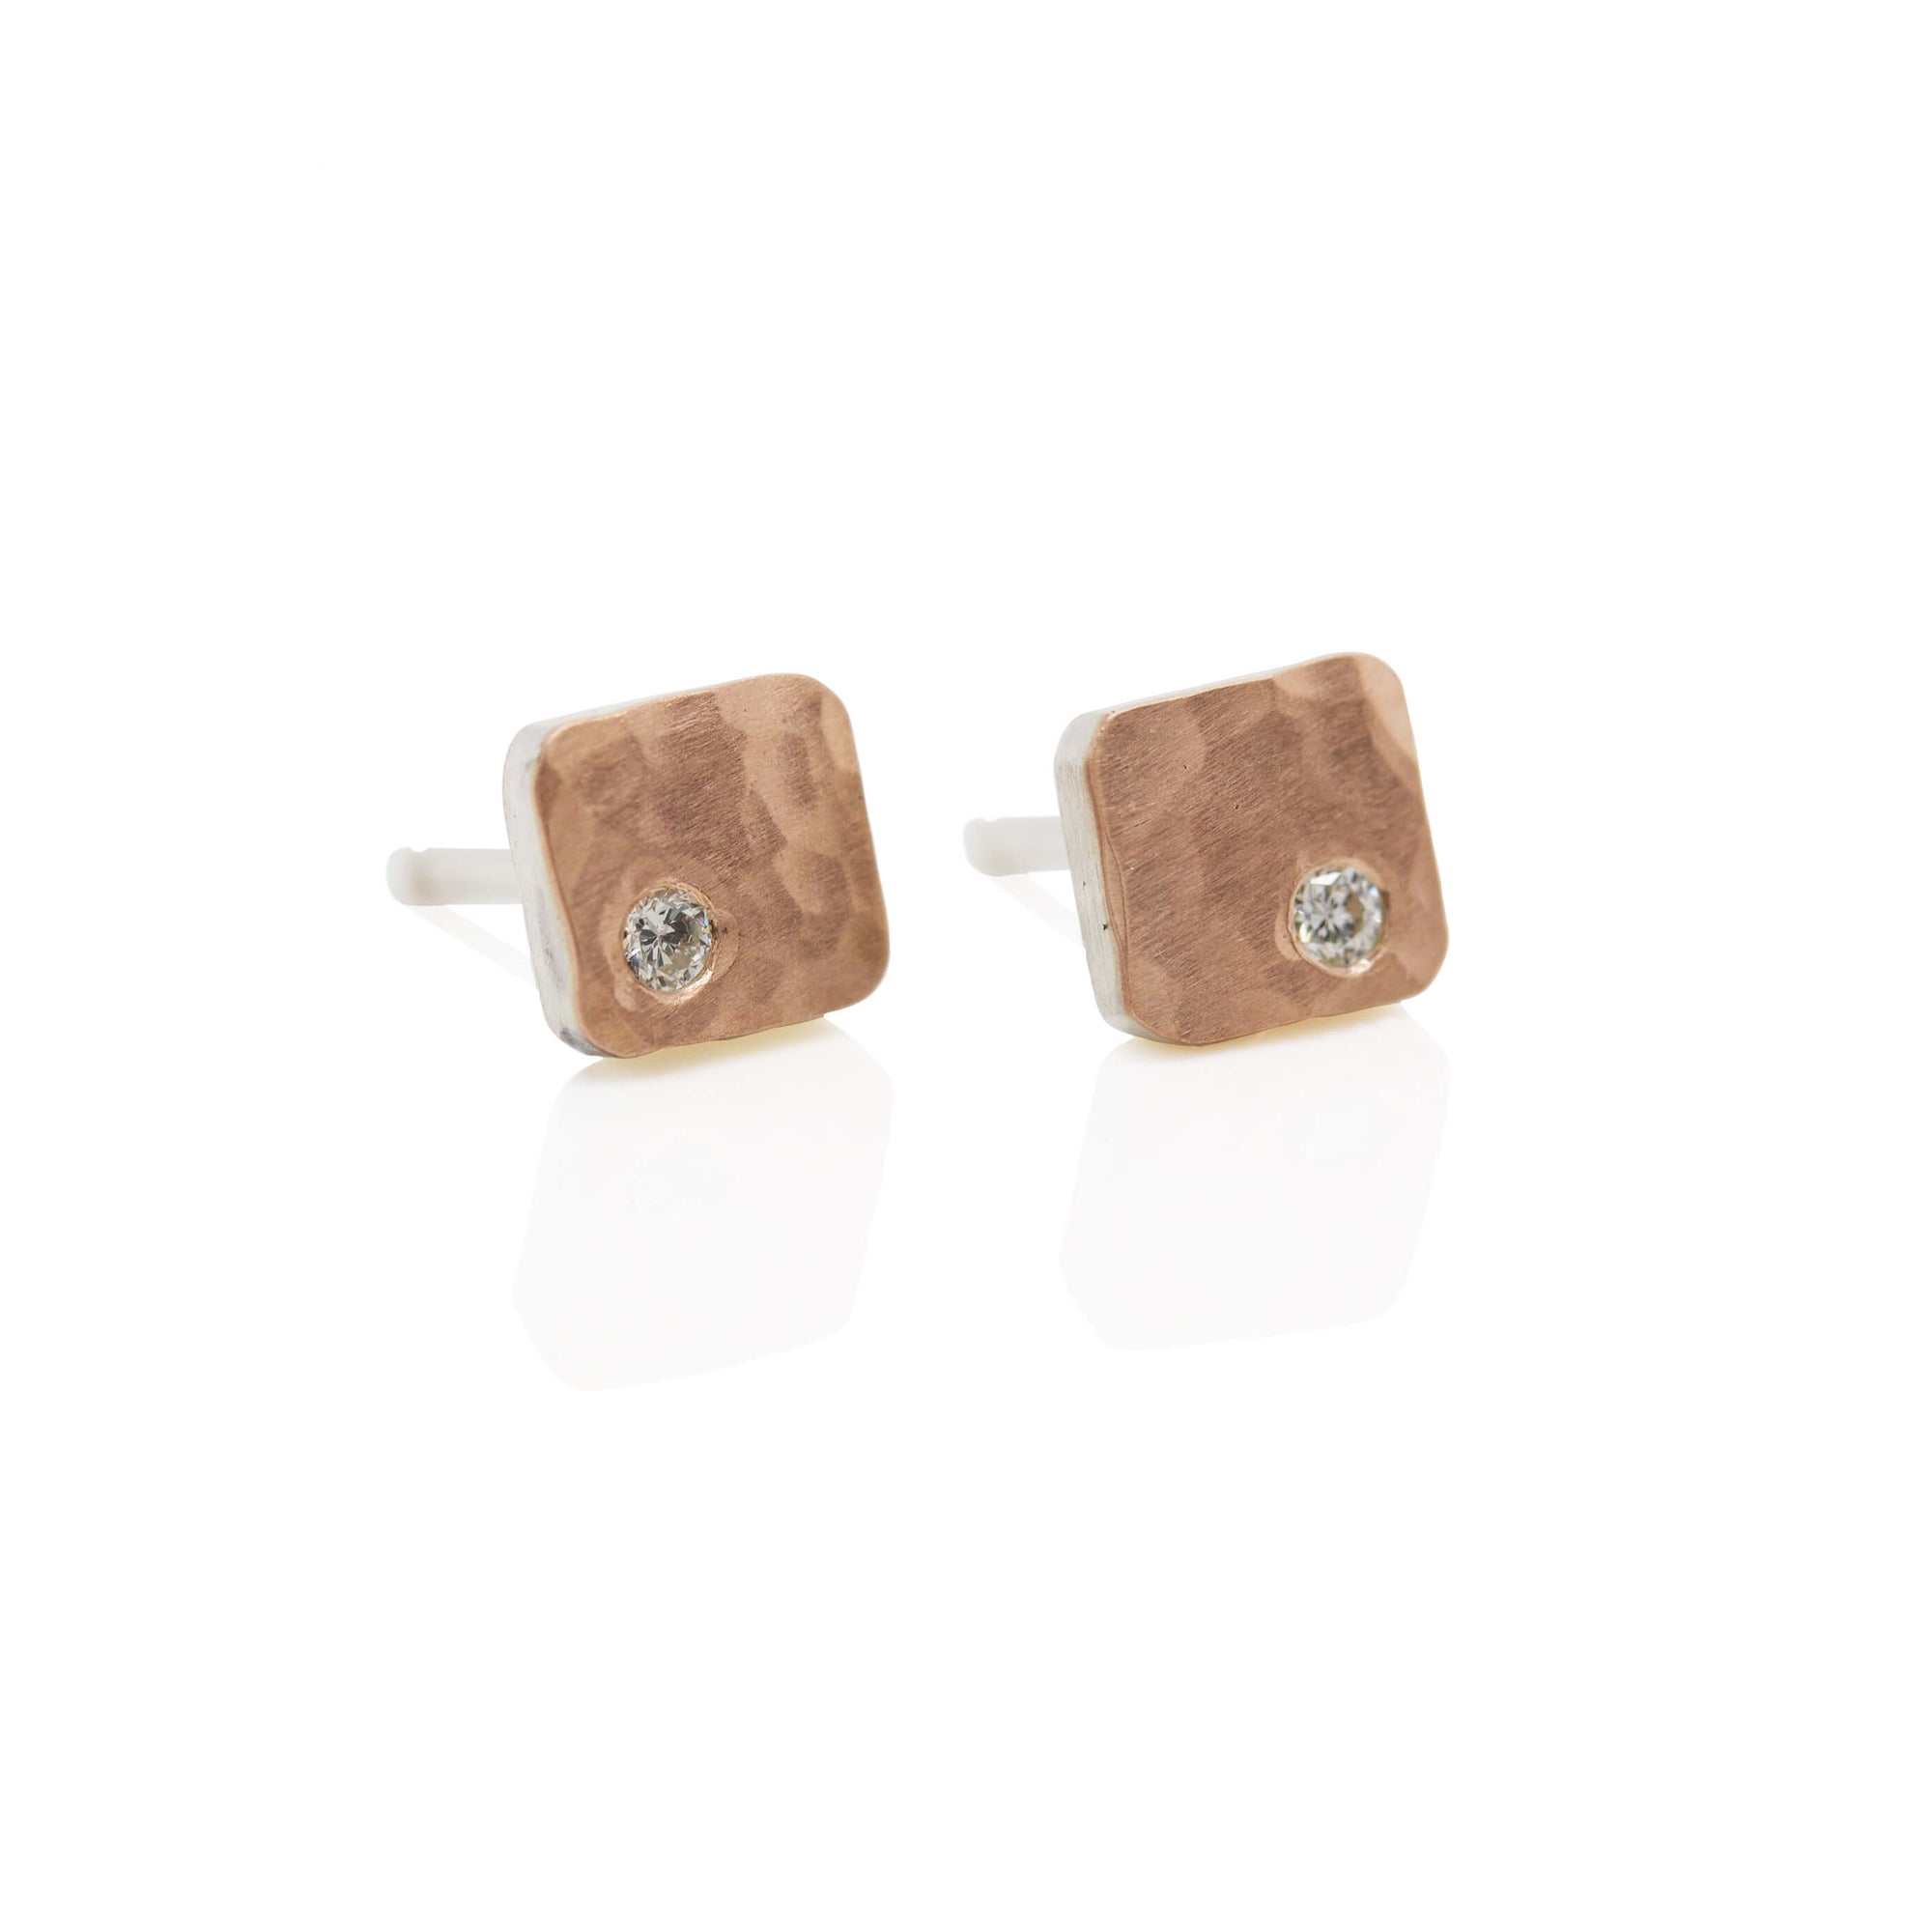 6mm Cell Studs in Hammered Gold with Diamond Accents